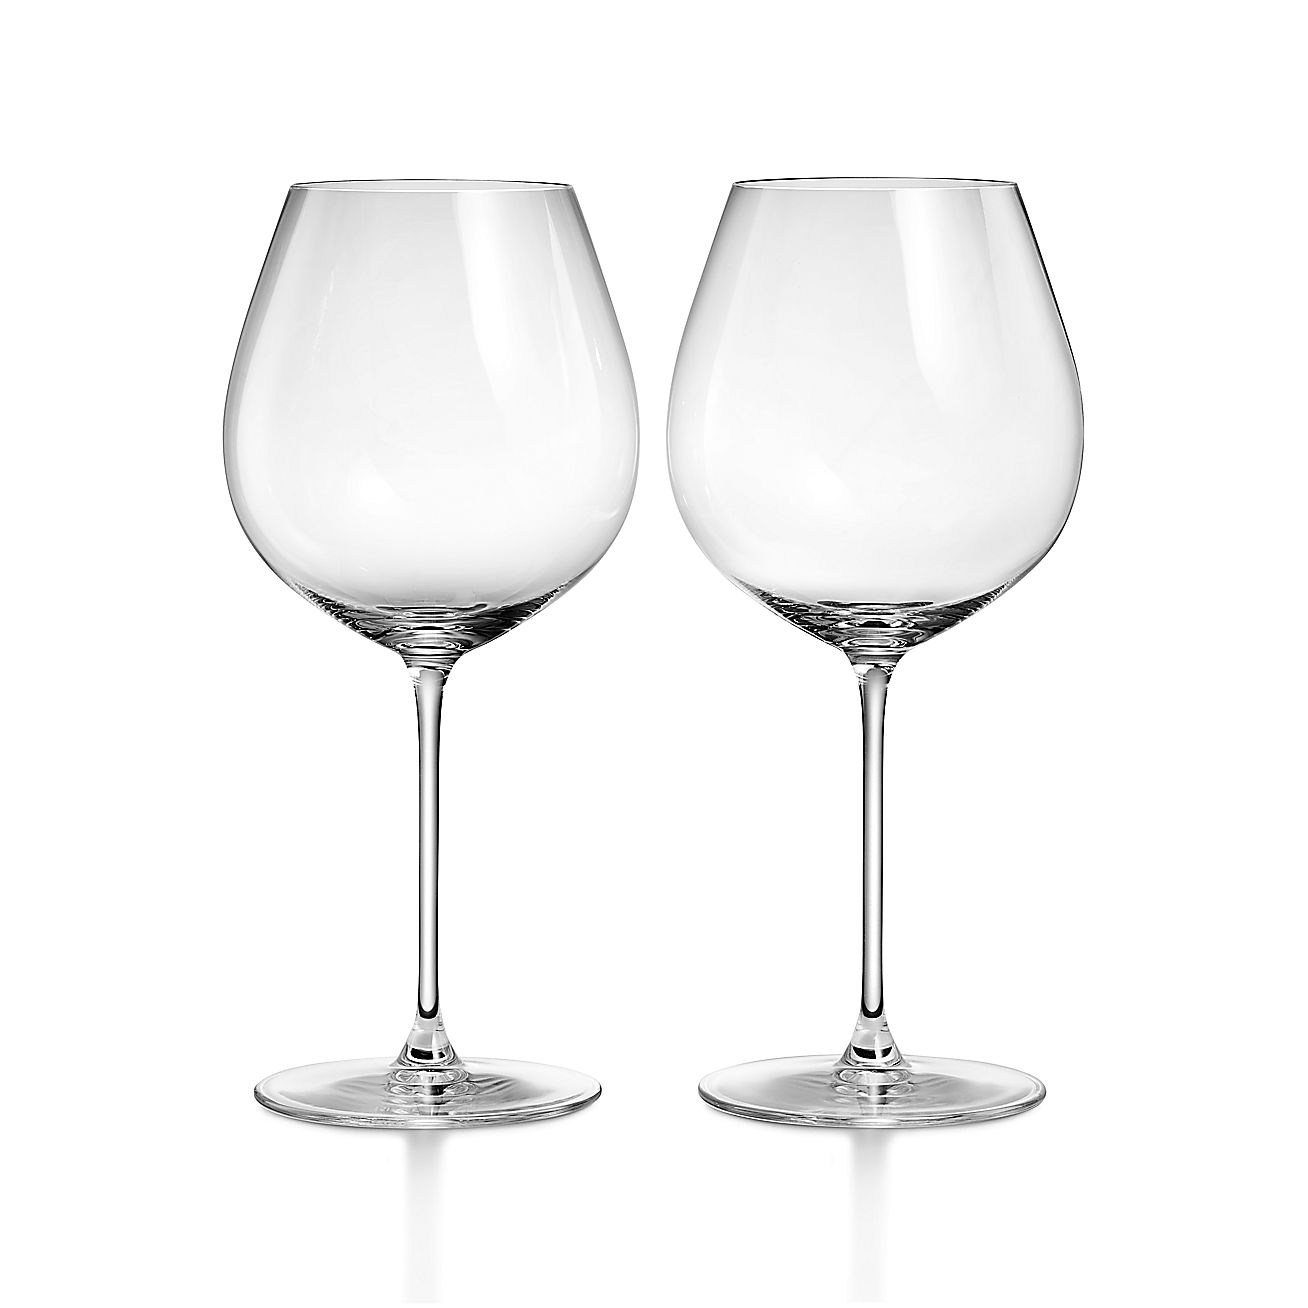 Tiffany Home Essentials Pinot Noir Wine Glass in Crystal Glass